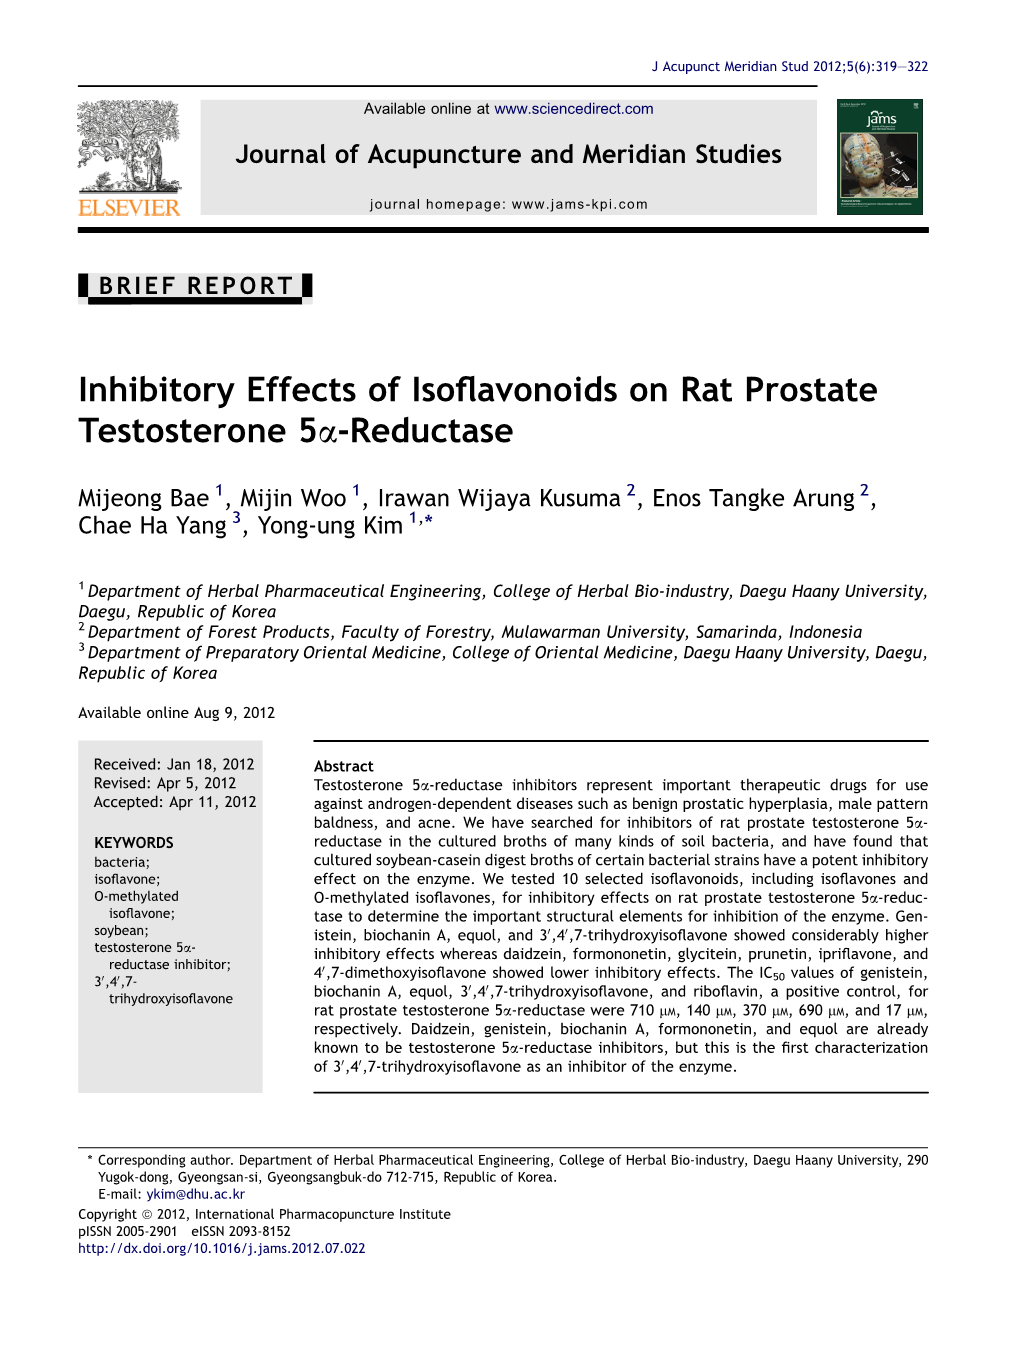 Inhibitory Effects of Isoflavonoids on Rat Prostate